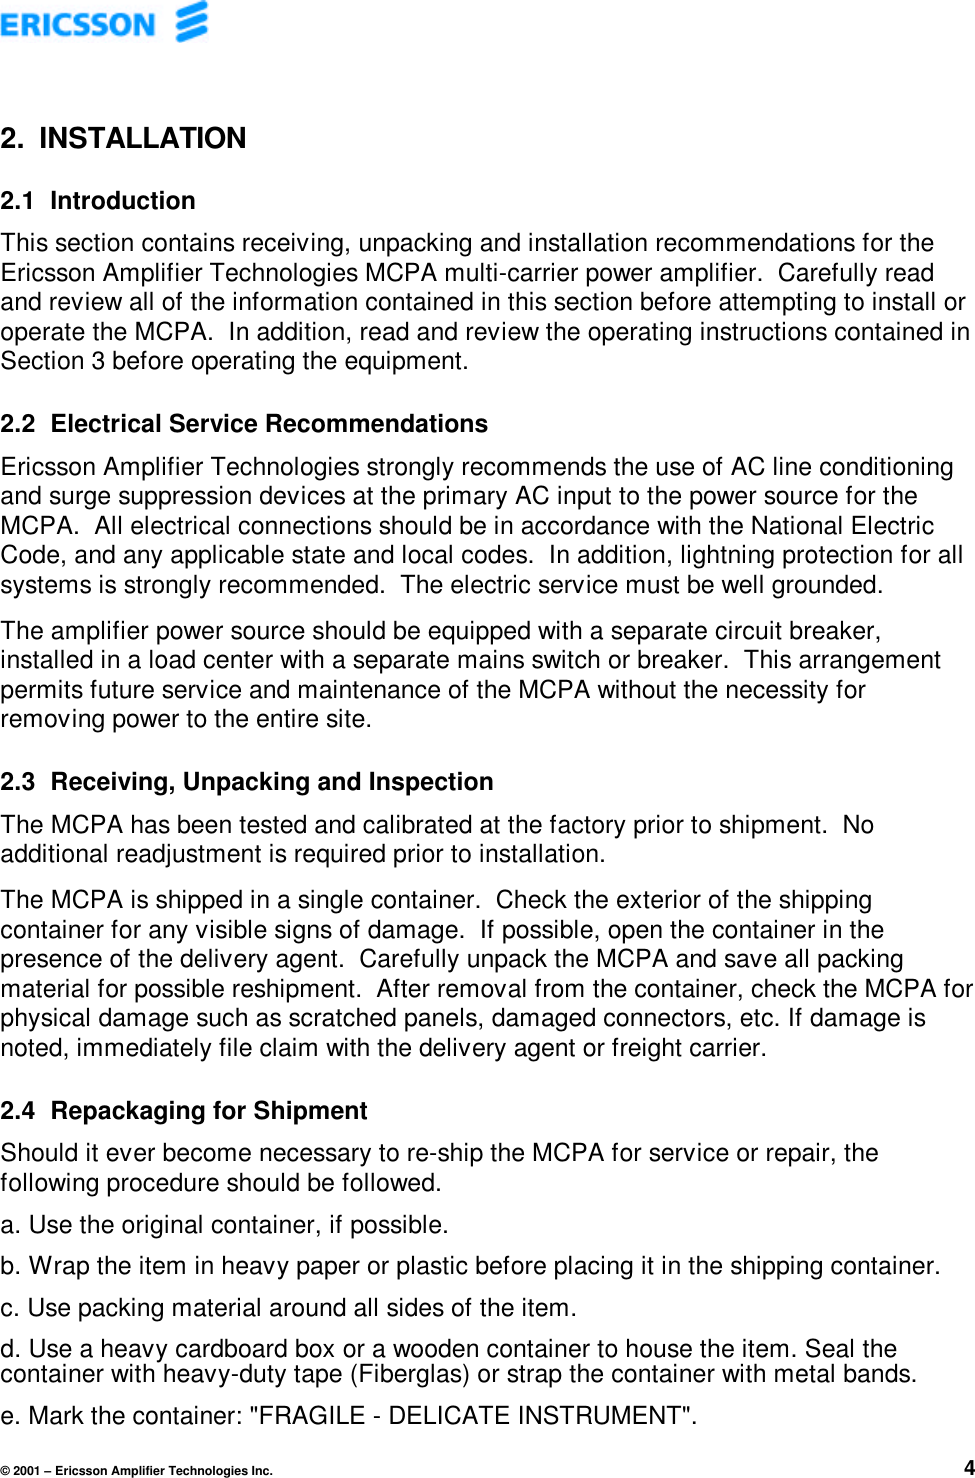 © 2001 – Ericsson Amplifier Technologies Inc. 42. INSTALLATION2.1 IntroductionThis section contains receiving, unpacking and installation recommendations for theEricsson Amplifier Technologies MCPA multi-carrier power amplifier.  Carefully readand review all of the information contained in this section before attempting to install oroperate the MCPA.  In addition, read and review the operating instructions contained inSection 3 before operating the equipment.2.2 Electrical Service RecommendationsEricsson Amplifier Technologies strongly recommends the use of AC line conditioningand surge suppression devices at the primary AC input to the power source for theMCPA.  All electrical connections should be in accordance with the National ElectricCode, and any applicable state and local codes.  In addition, lightning protection for allsystems is strongly recommended.  The electric service must be well grounded.The amplifier power source should be equipped with a separate circuit breaker,installed in a load center with a separate mains switch or breaker.  This arrangementpermits future service and maintenance of the MCPA without the necessity forremoving power to the entire site.2.3 Receiving, Unpacking and InspectionThe MCPA has been tested and calibrated at the factory prior to shipment.  Noadditional readjustment is required prior to installation.The MCPA is shipped in a single container.  Check the exterior of the shippingcontainer for any visible signs of damage.  If possible, open the container in thepresence of the delivery agent.  Carefully unpack the MCPA and save all packingmaterial for possible reshipment.  After removal from the container, check the MCPA forphysical damage such as scratched panels, damaged connectors, etc. If damage isnoted, immediately file claim with the delivery agent or freight carrier.2.4 Repackaging for ShipmentShould it ever become necessary to re-ship the MCPA for service or repair, thefollowing procedure should be followed.a. Use the original container, if possible.b. Wrap the item in heavy paper or plastic before placing it in the shipping container.c. Use packing material around all sides of the item.d. Use a heavy cardboard box or a wooden container to house the item. Seal thecontainer with heavy-duty tape (Fiberglas) or strap the container with metal bands.e. Mark the container: &quot;FRAGILE - DELICATE INSTRUMENT&quot;.